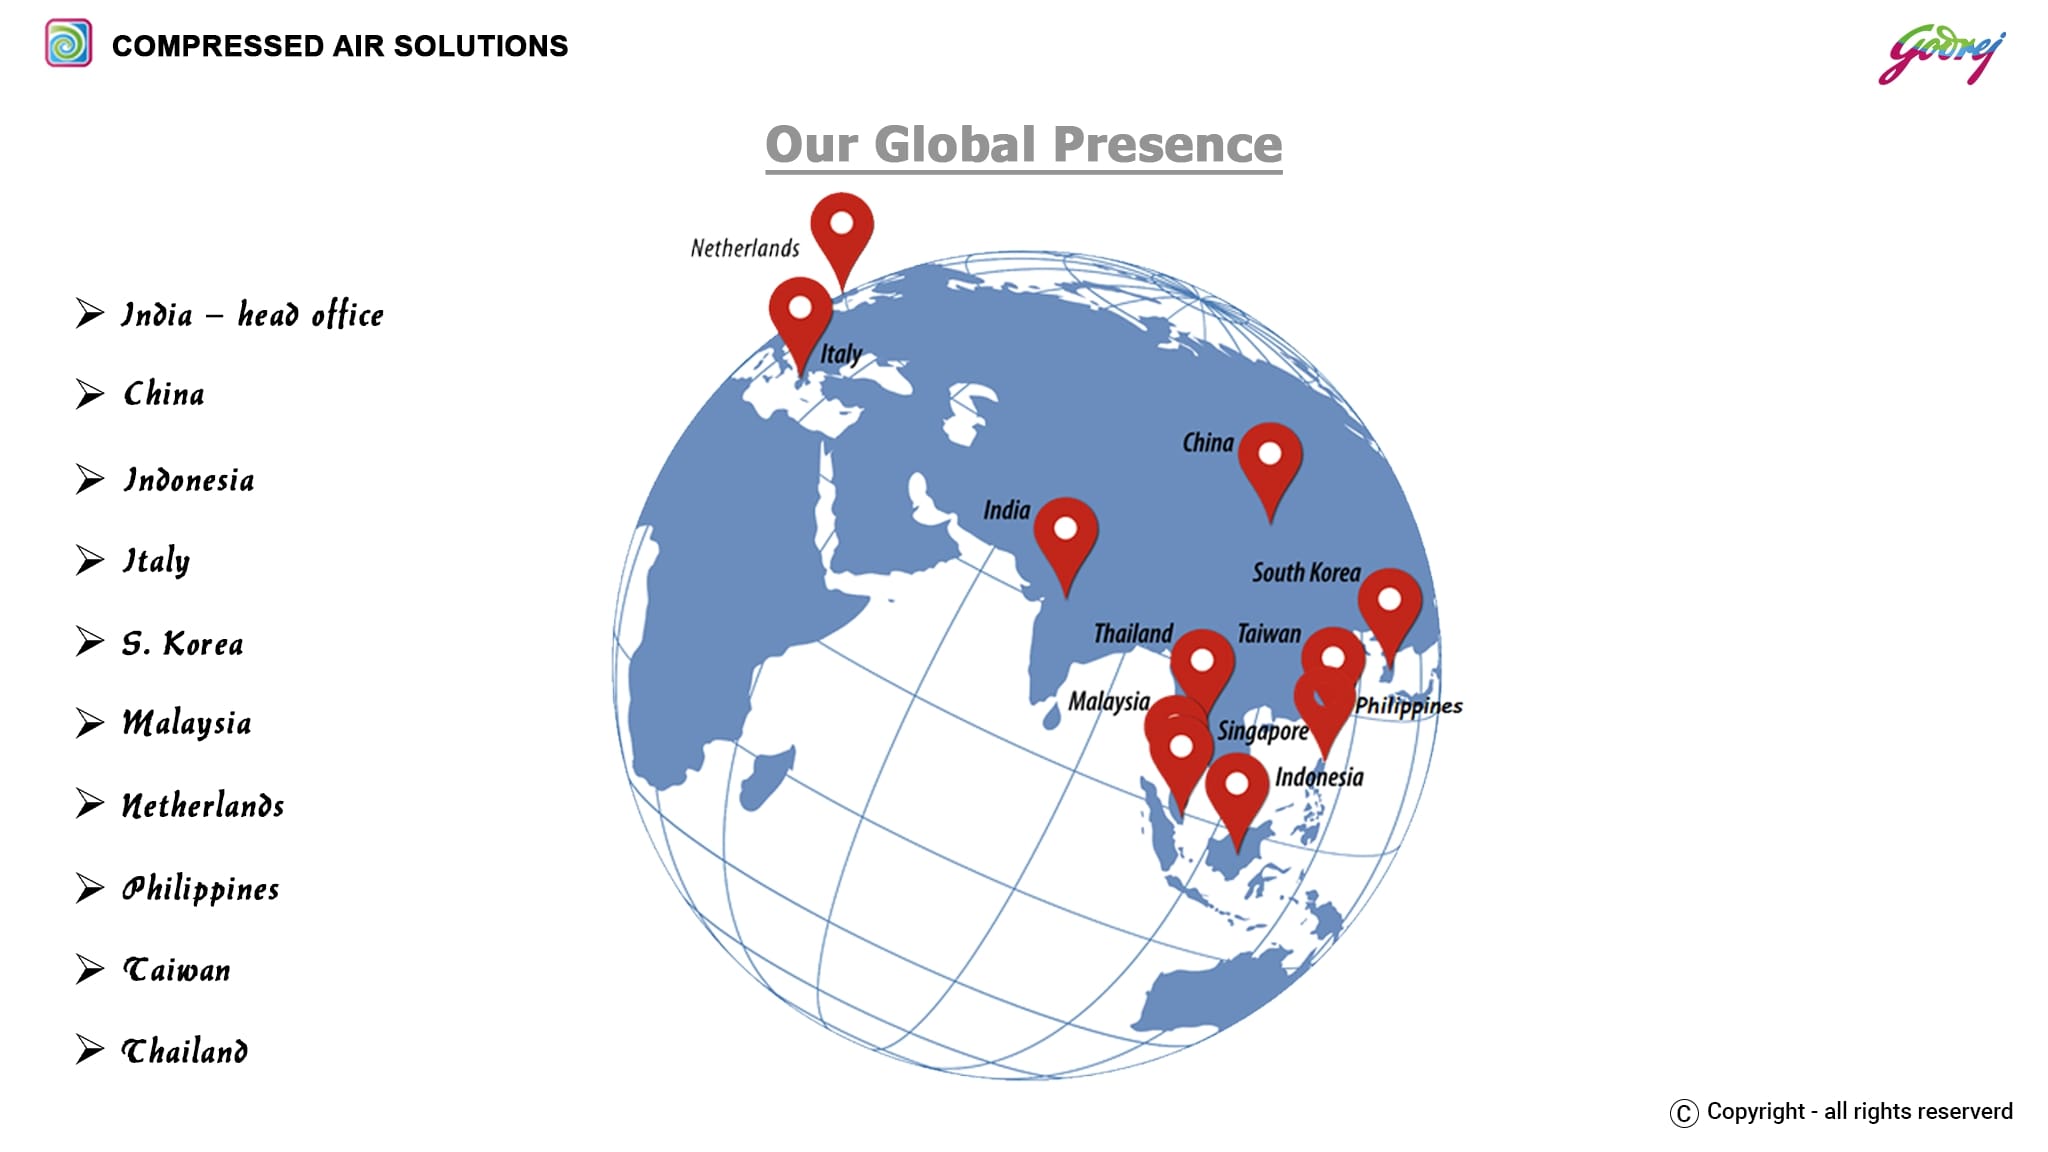 Our Global Presence-ENERGY SAVING SOLUTIONS IN COMPRESSED AIR NETWORK (GODREJ)